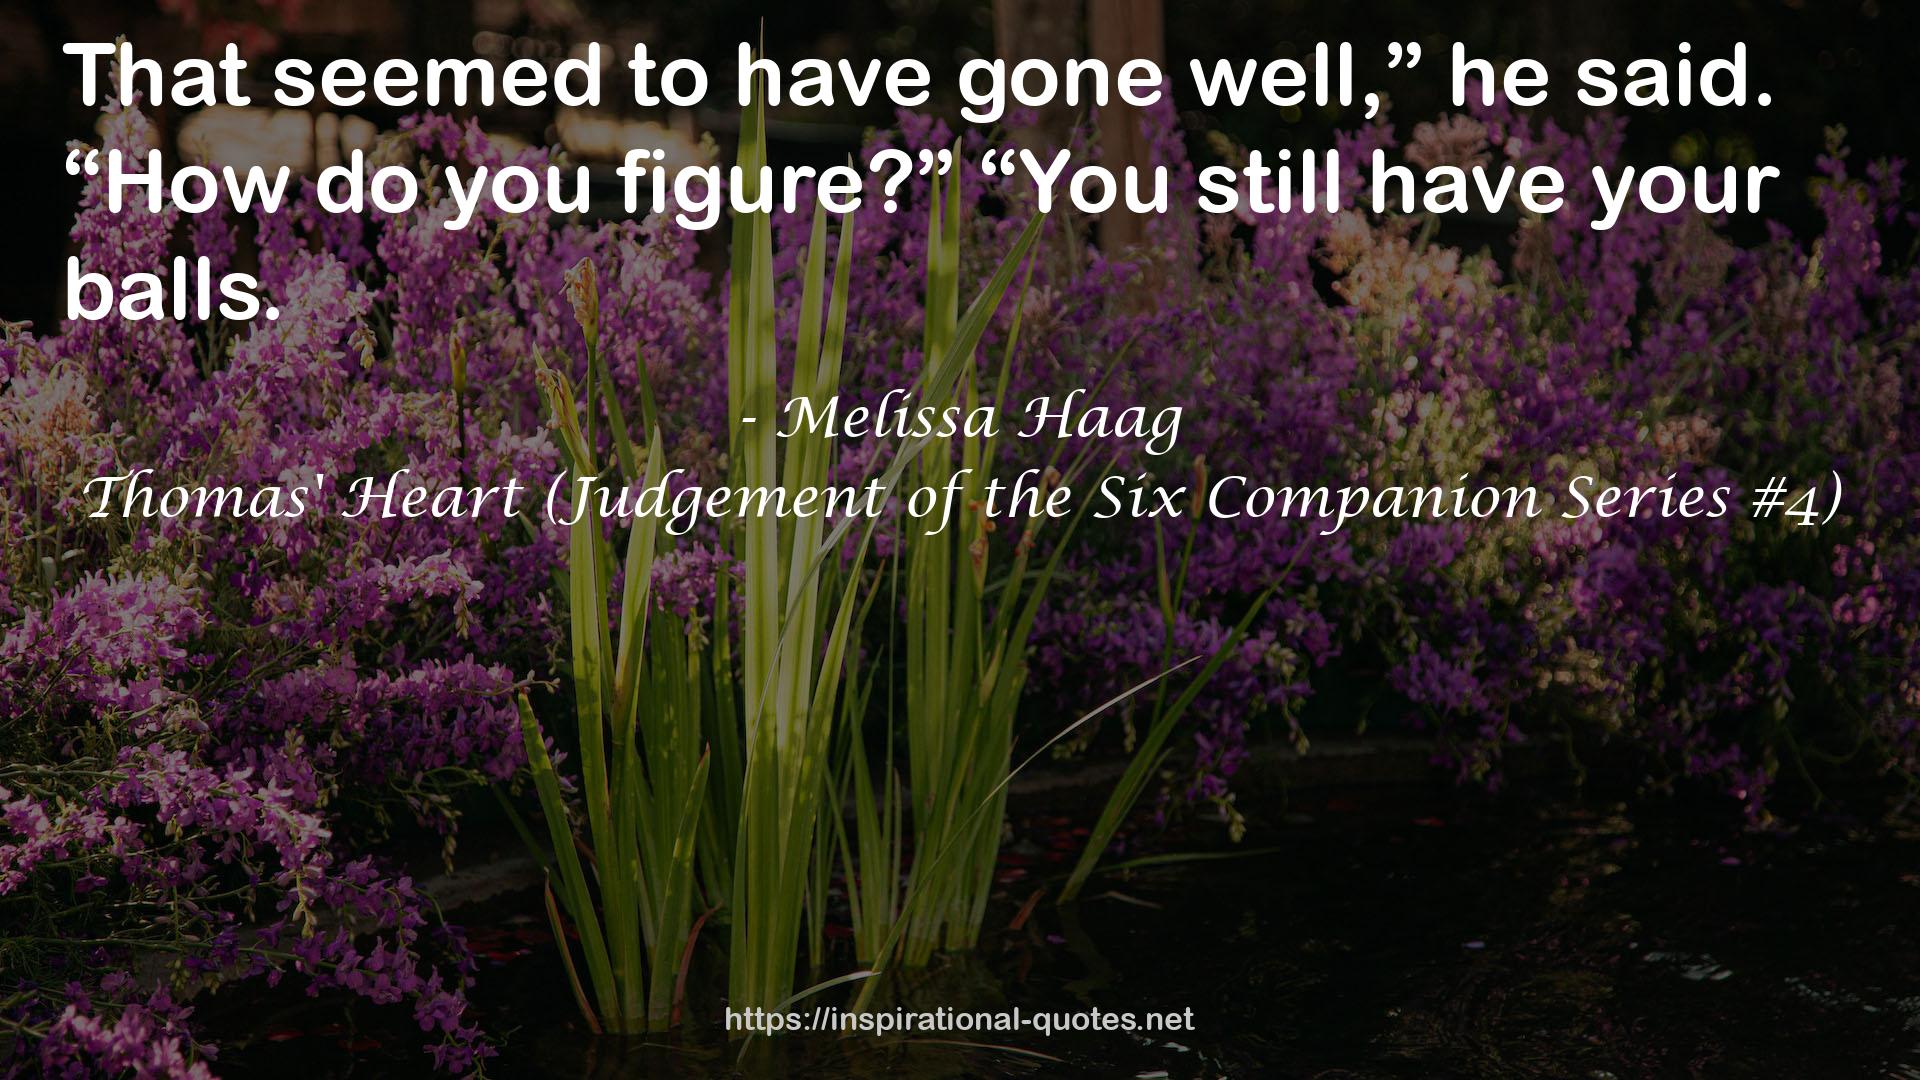 Thomas' Heart (Judgement of the Six Companion Series #4) QUOTES